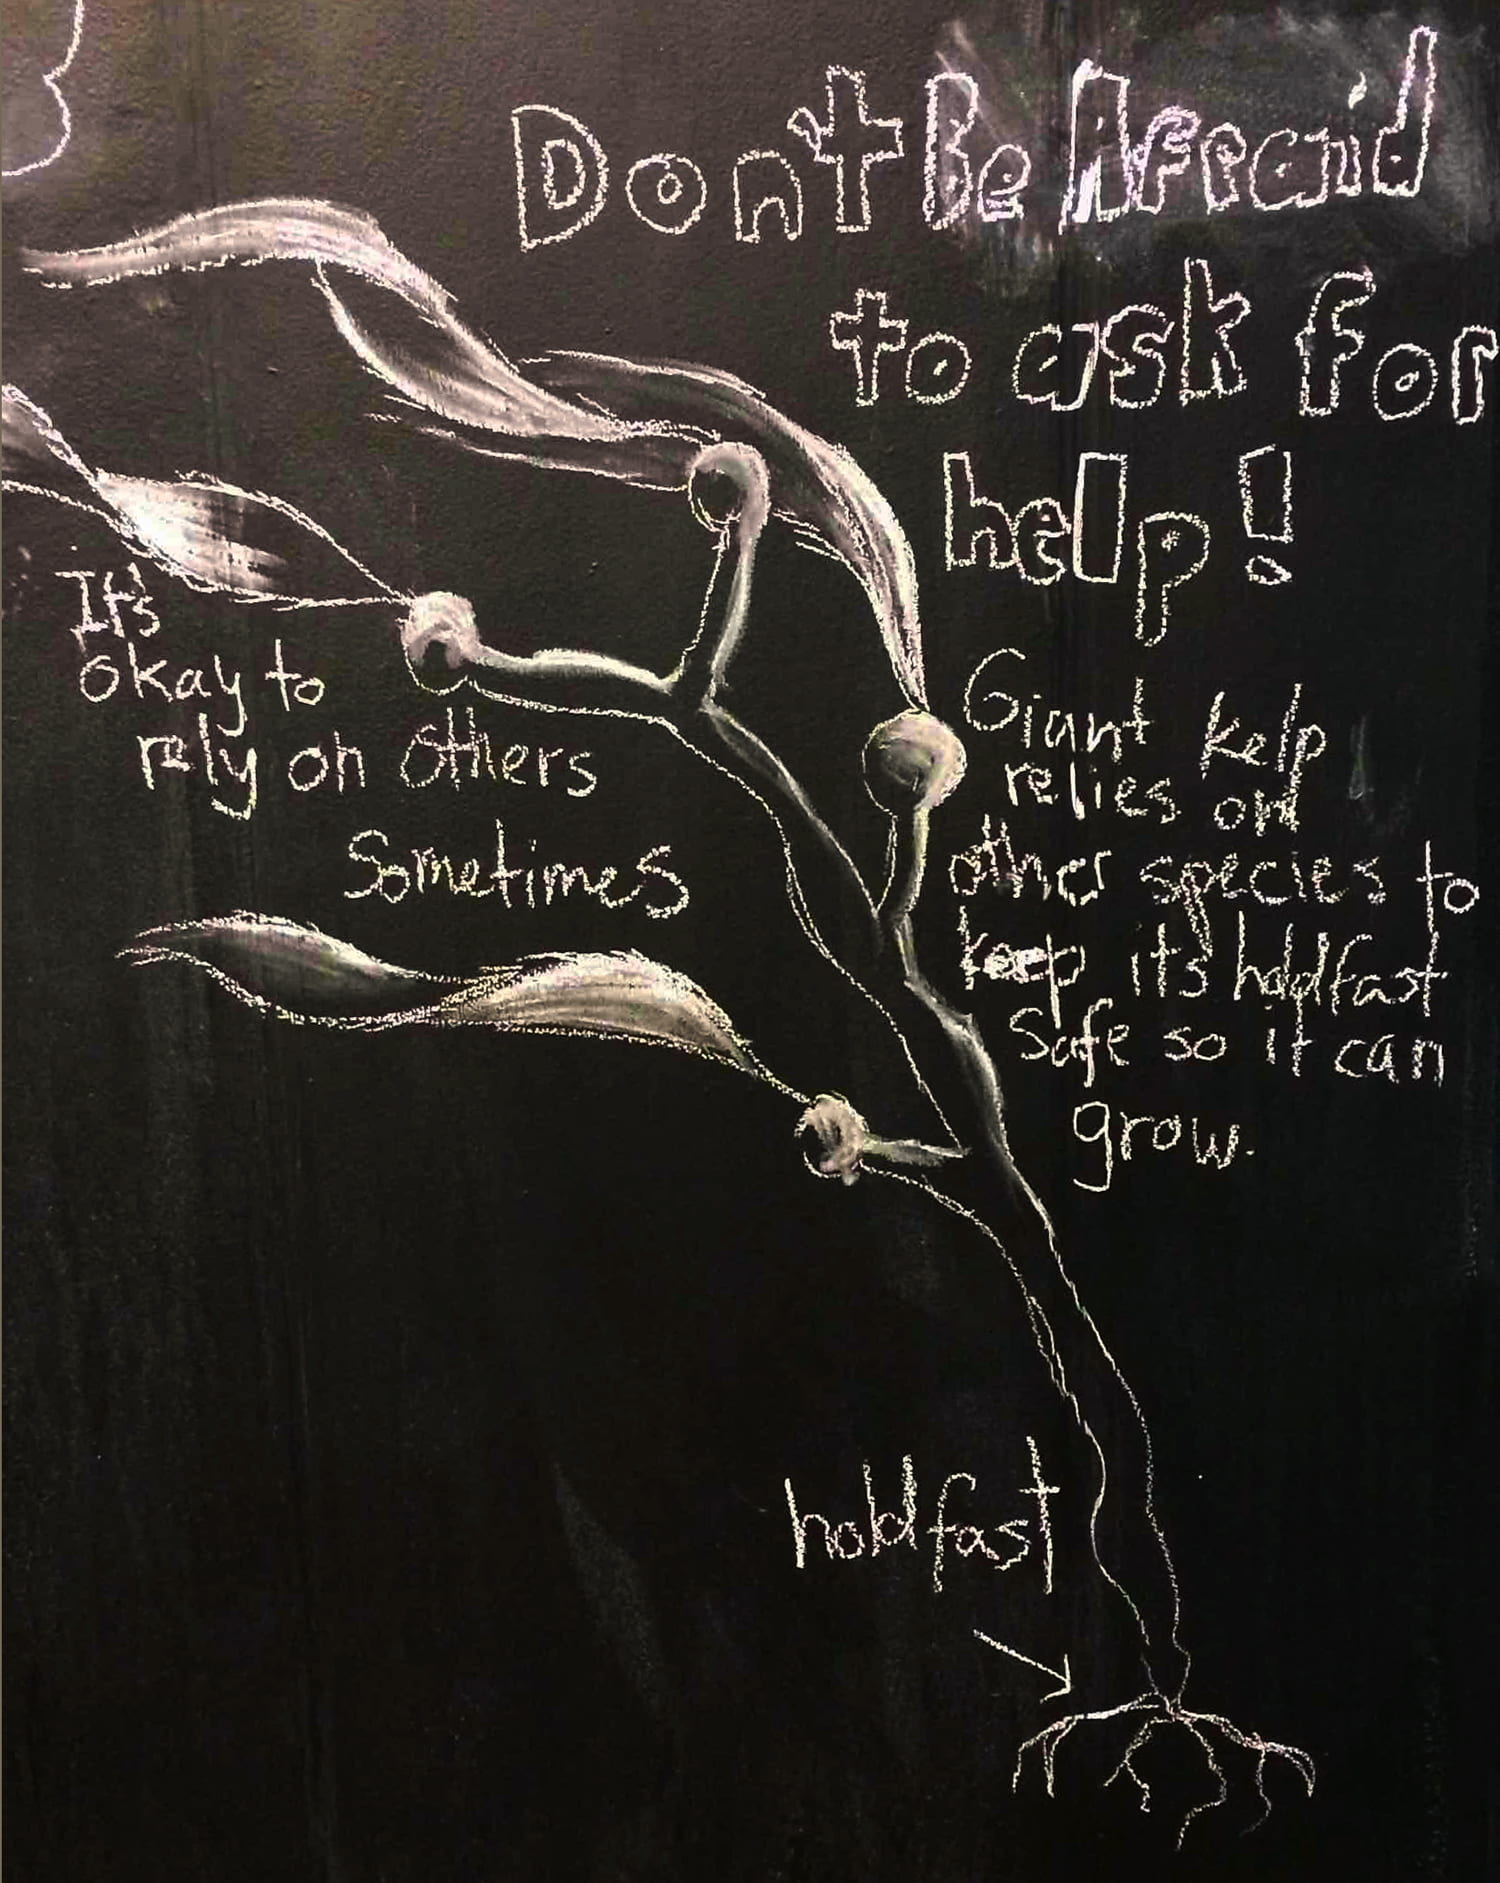 drawing of kelp, it's roots labeled "holdfast", and the words "Don't be afraid to ask for help! Giant kept relies on other species to keep its holdfast safe so it can grow. It's okay to rely on others sometimes"